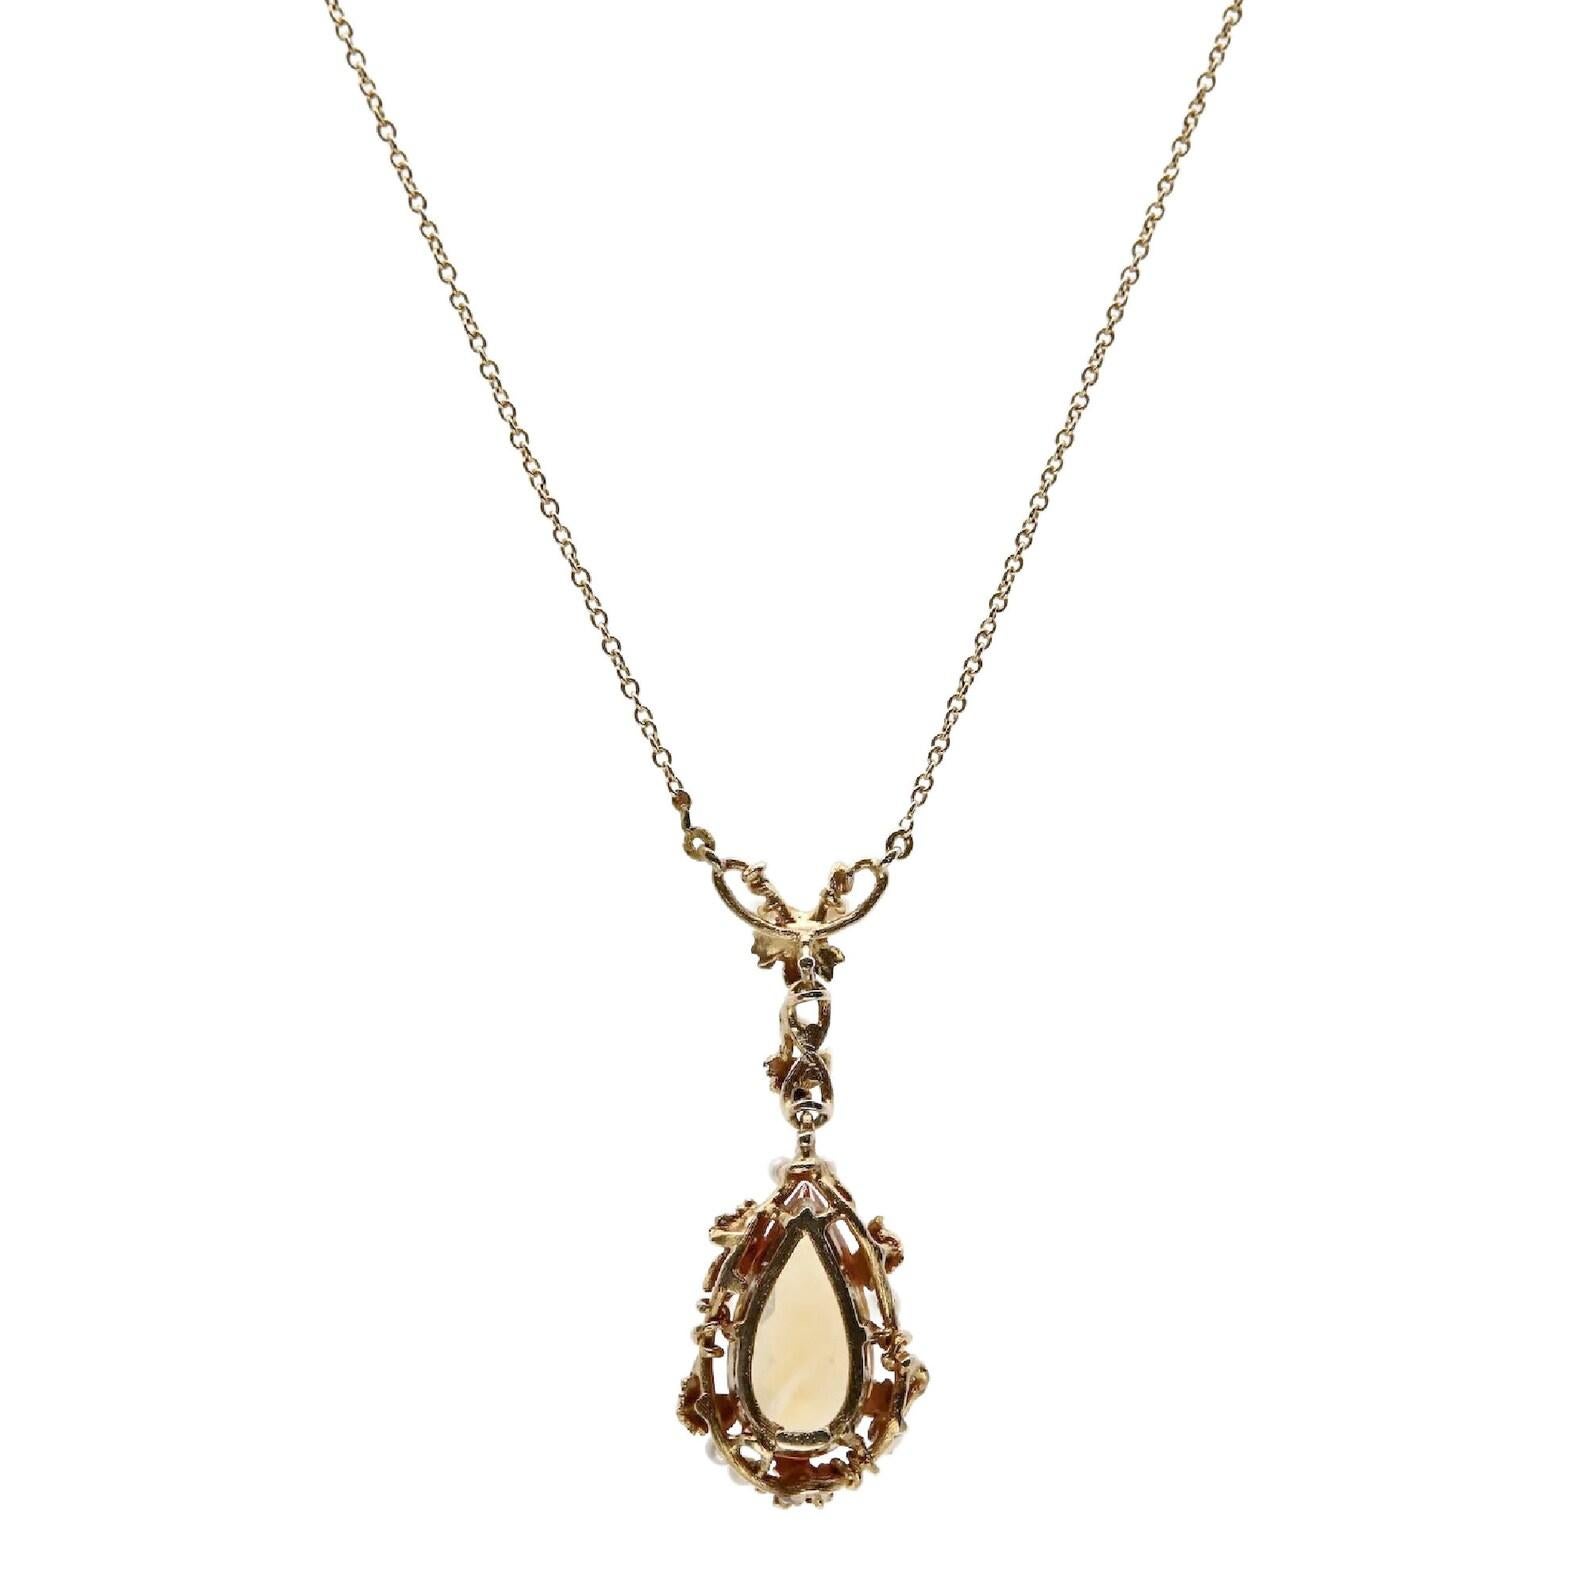 A beautiful art nouveau necklace by Maiden Lane maker Henry Kohn & Sons. Kohn were known for producing this exact style of beautiful organic work with richly detailed leaves and vines. This piece features a 10 carat natural precious topaz framed by